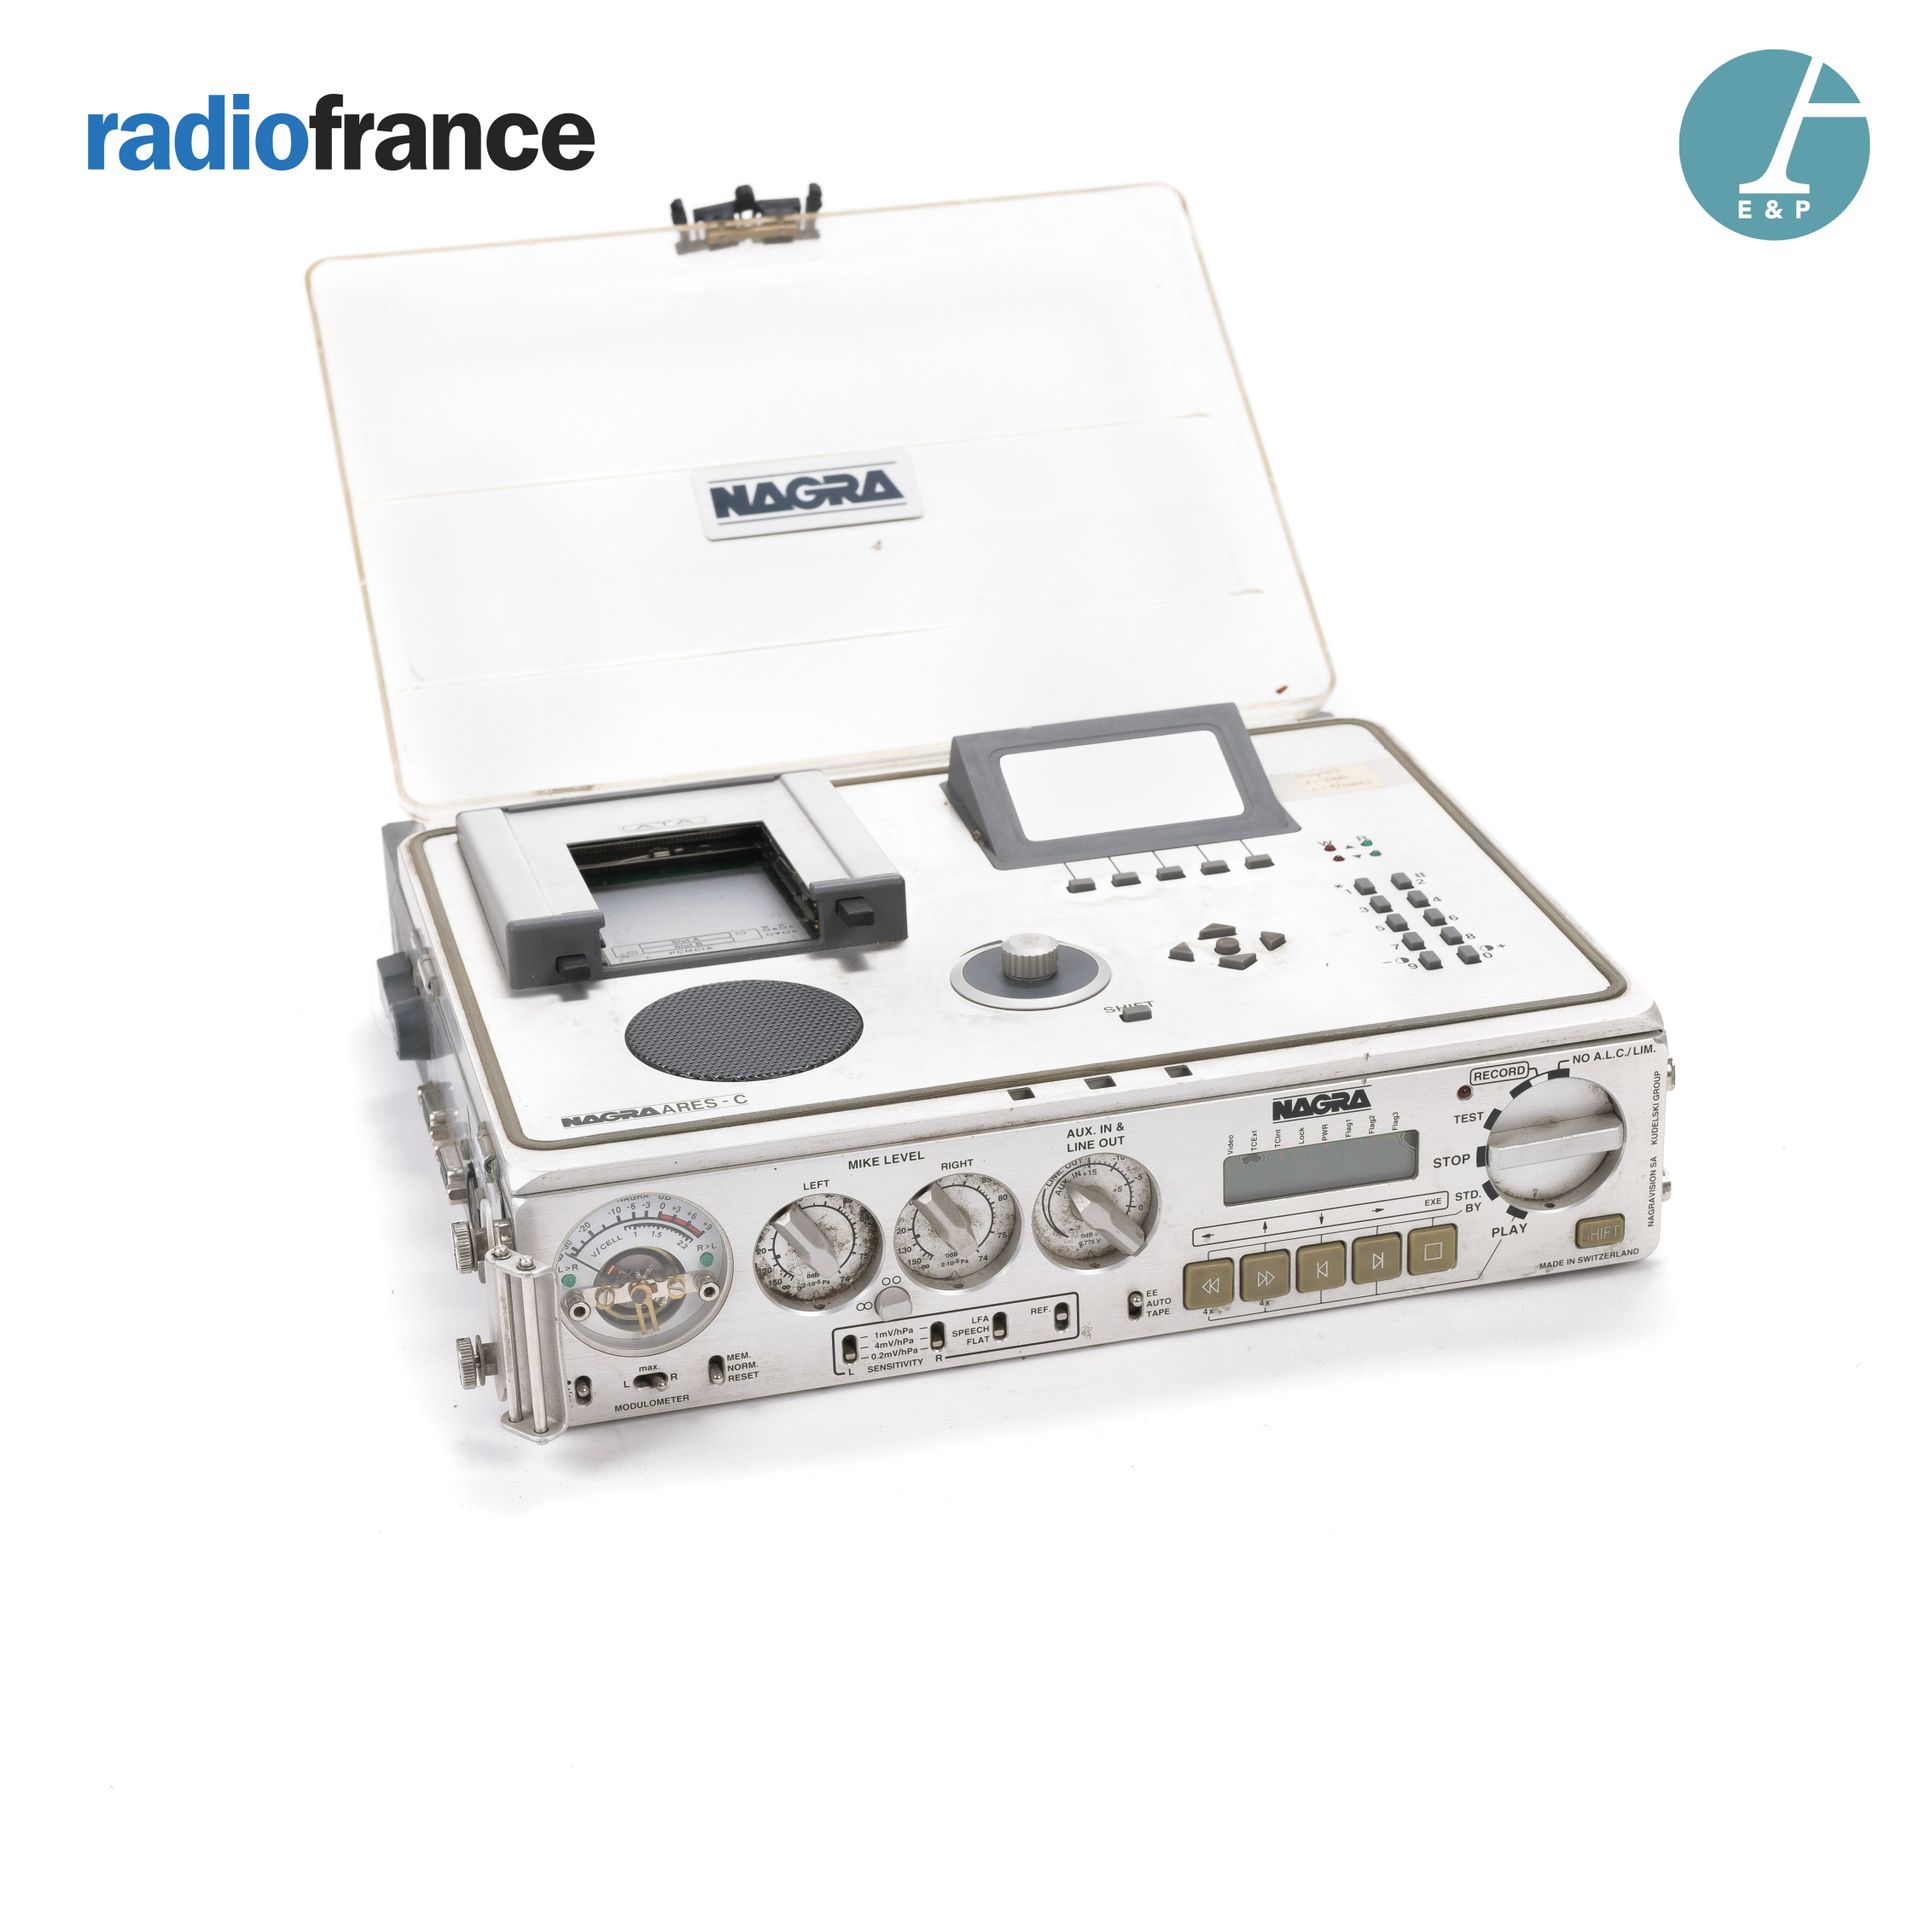 Null NAGRA recorder, Ares-C

H: 9,5cm - W: 29cm - D: 25cm

Reformed material, st&hellip;